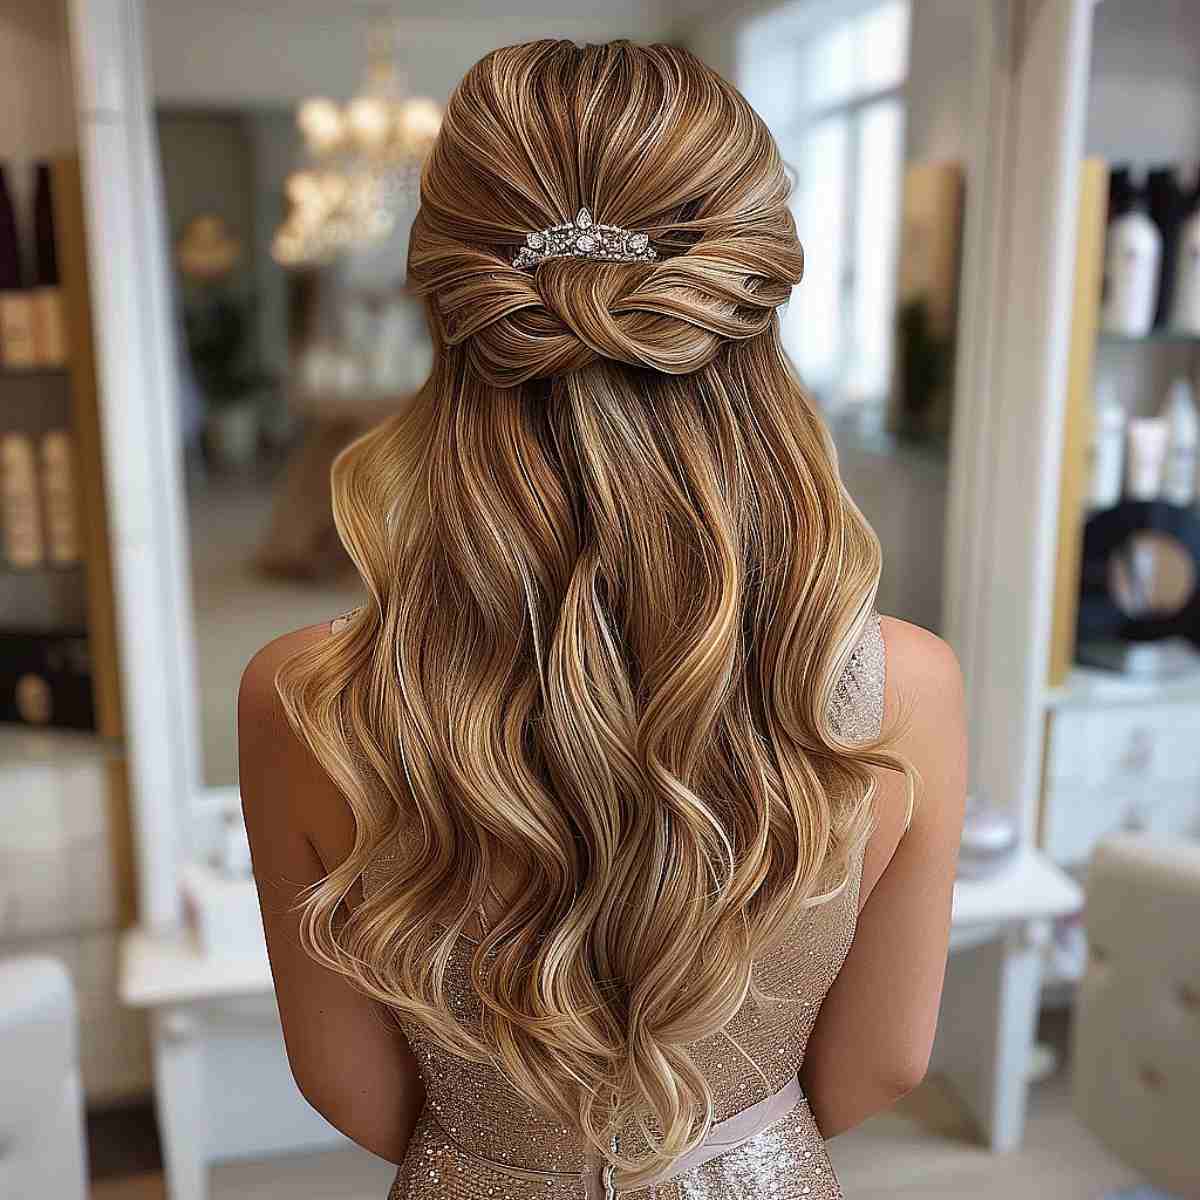 Wedding Updo. Bridal Prom Hairstyles For Long Hair Tutorial - YouTube